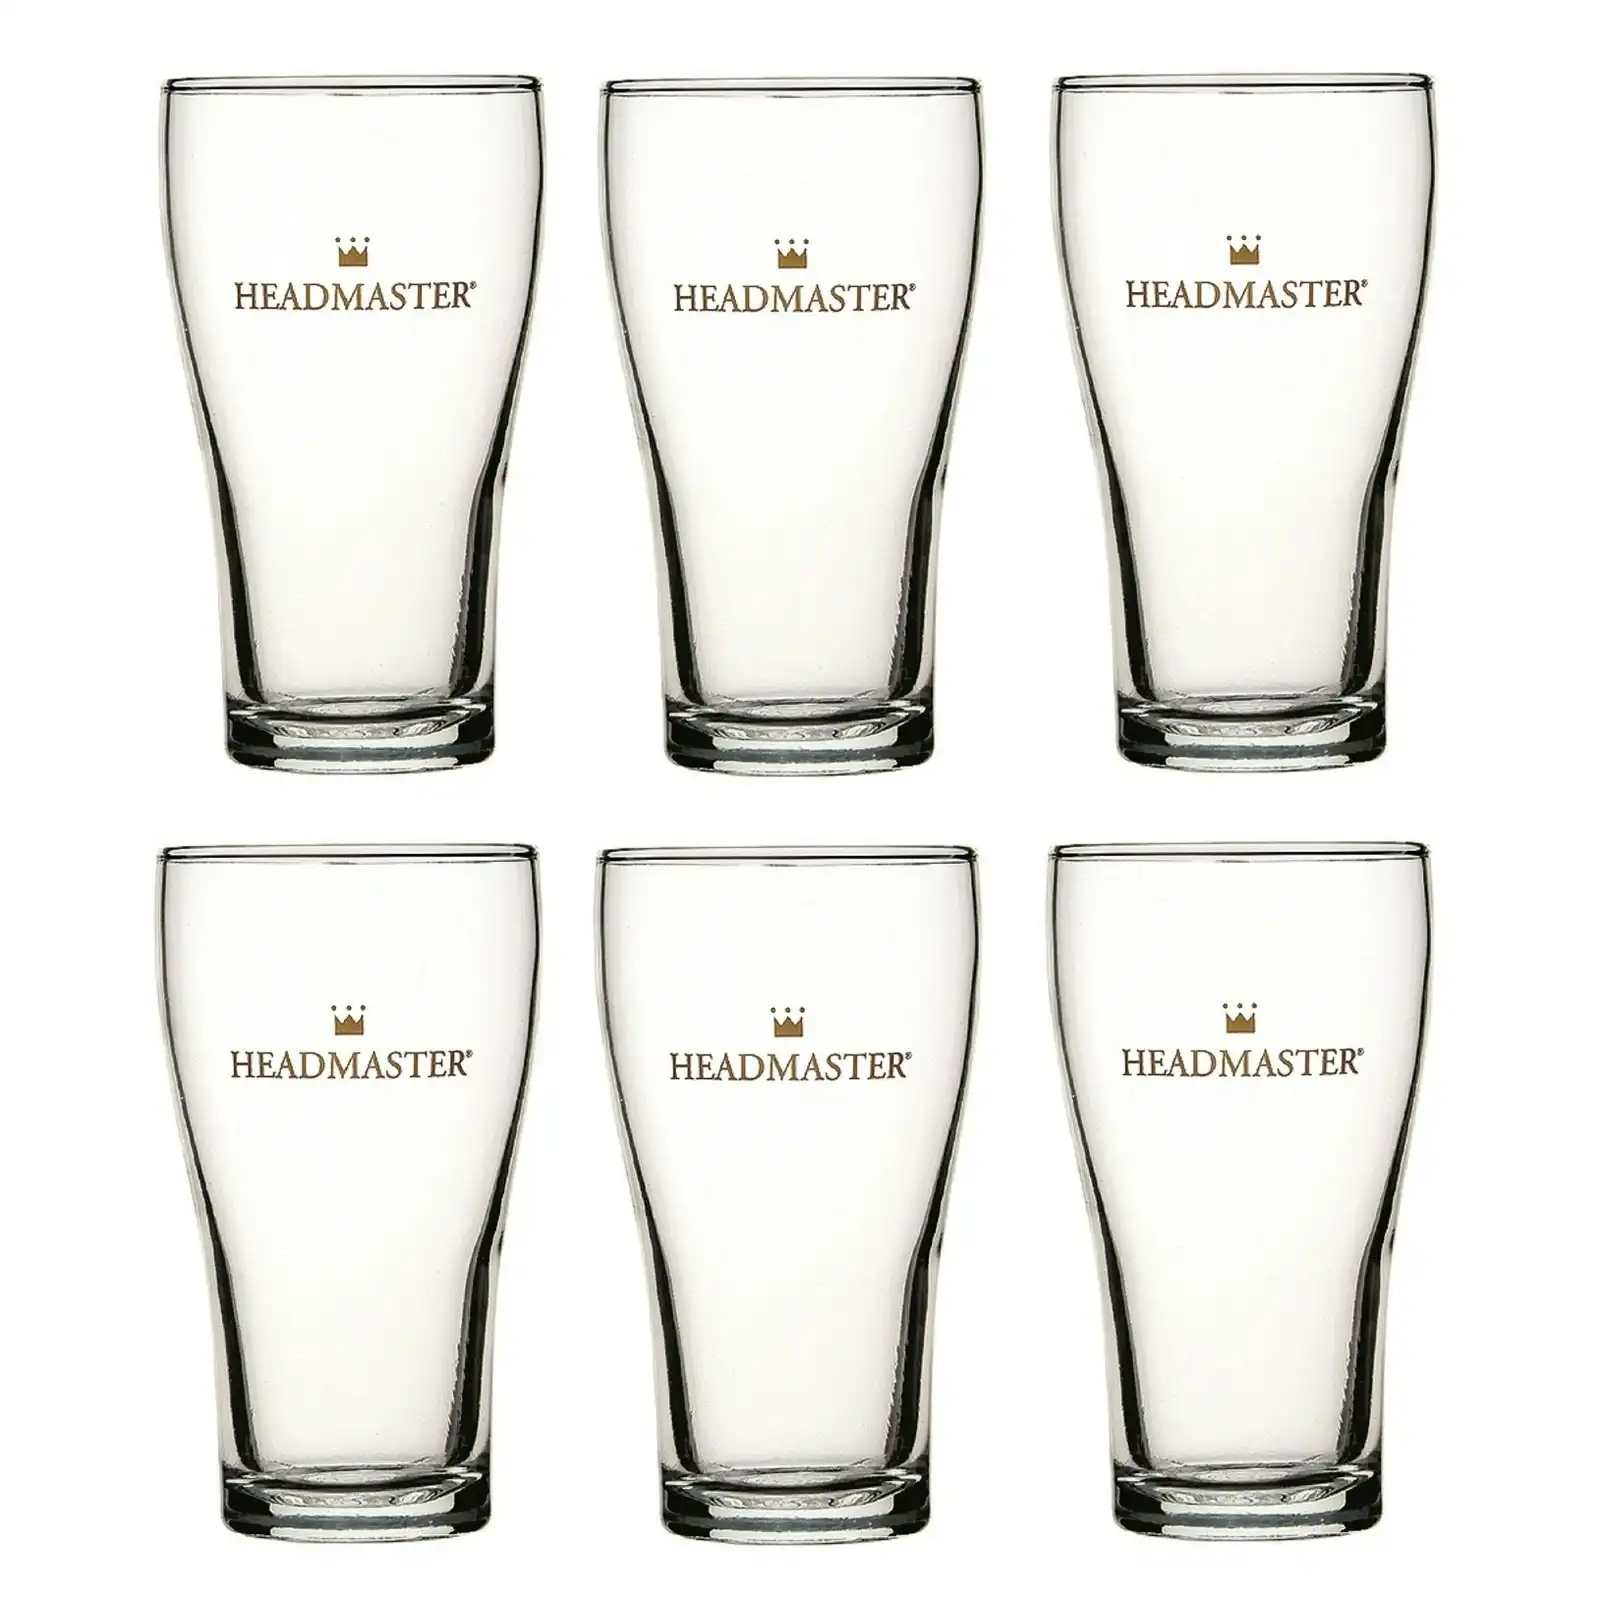 CROWN NUCLEATED Headmaster BEER CONICAL GLASSES 425ml - Set of 48